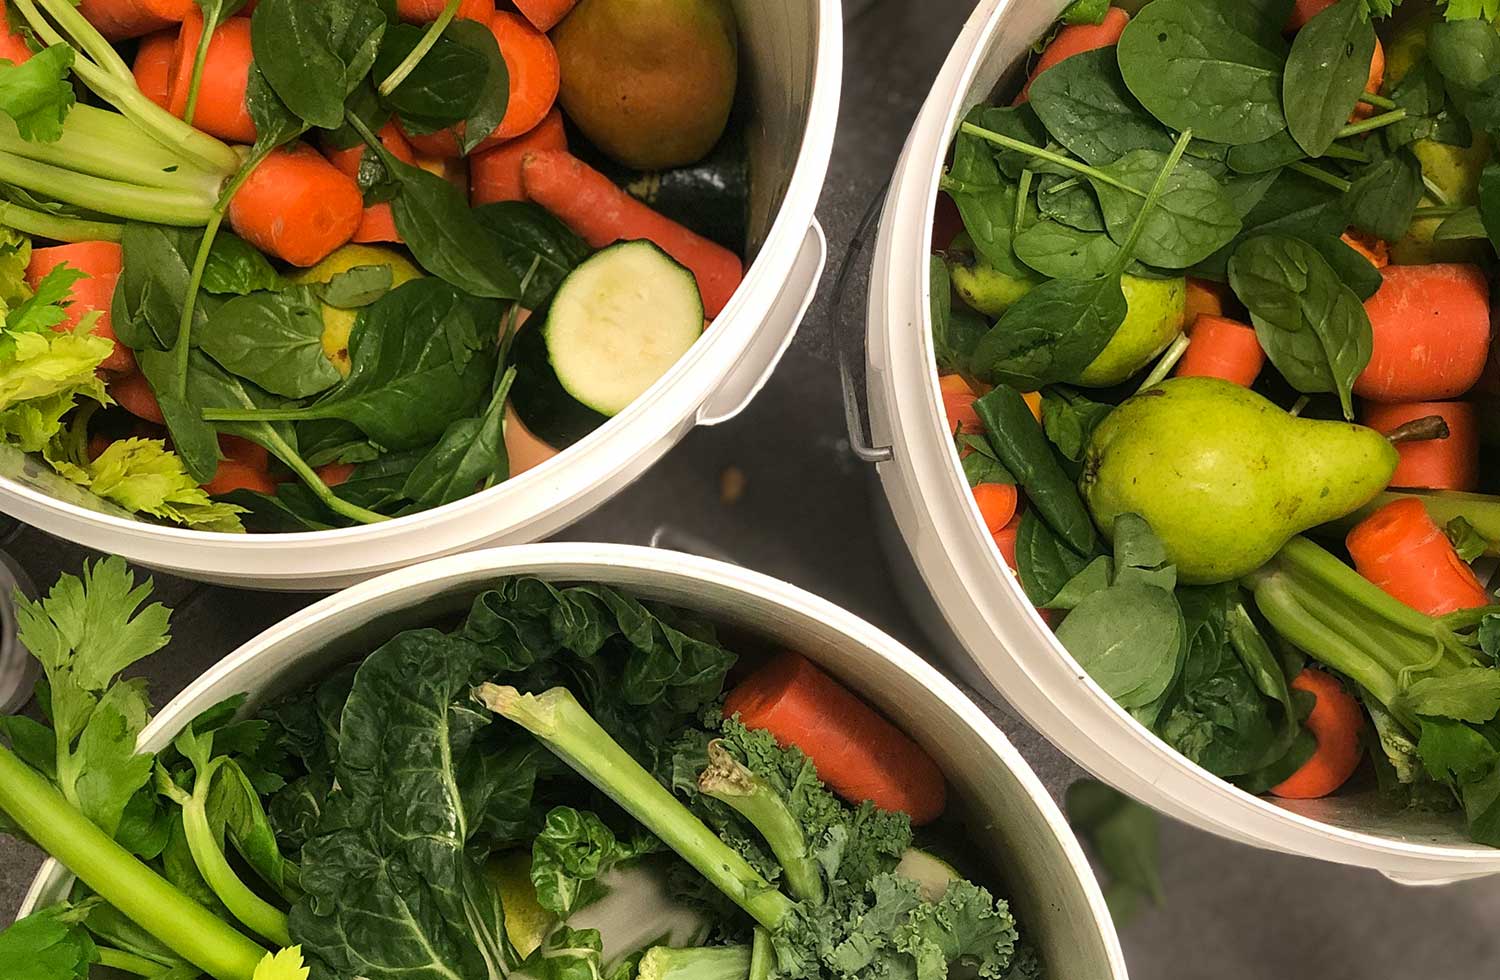 White buckets with leafy greens, zucchini, carrots and pears